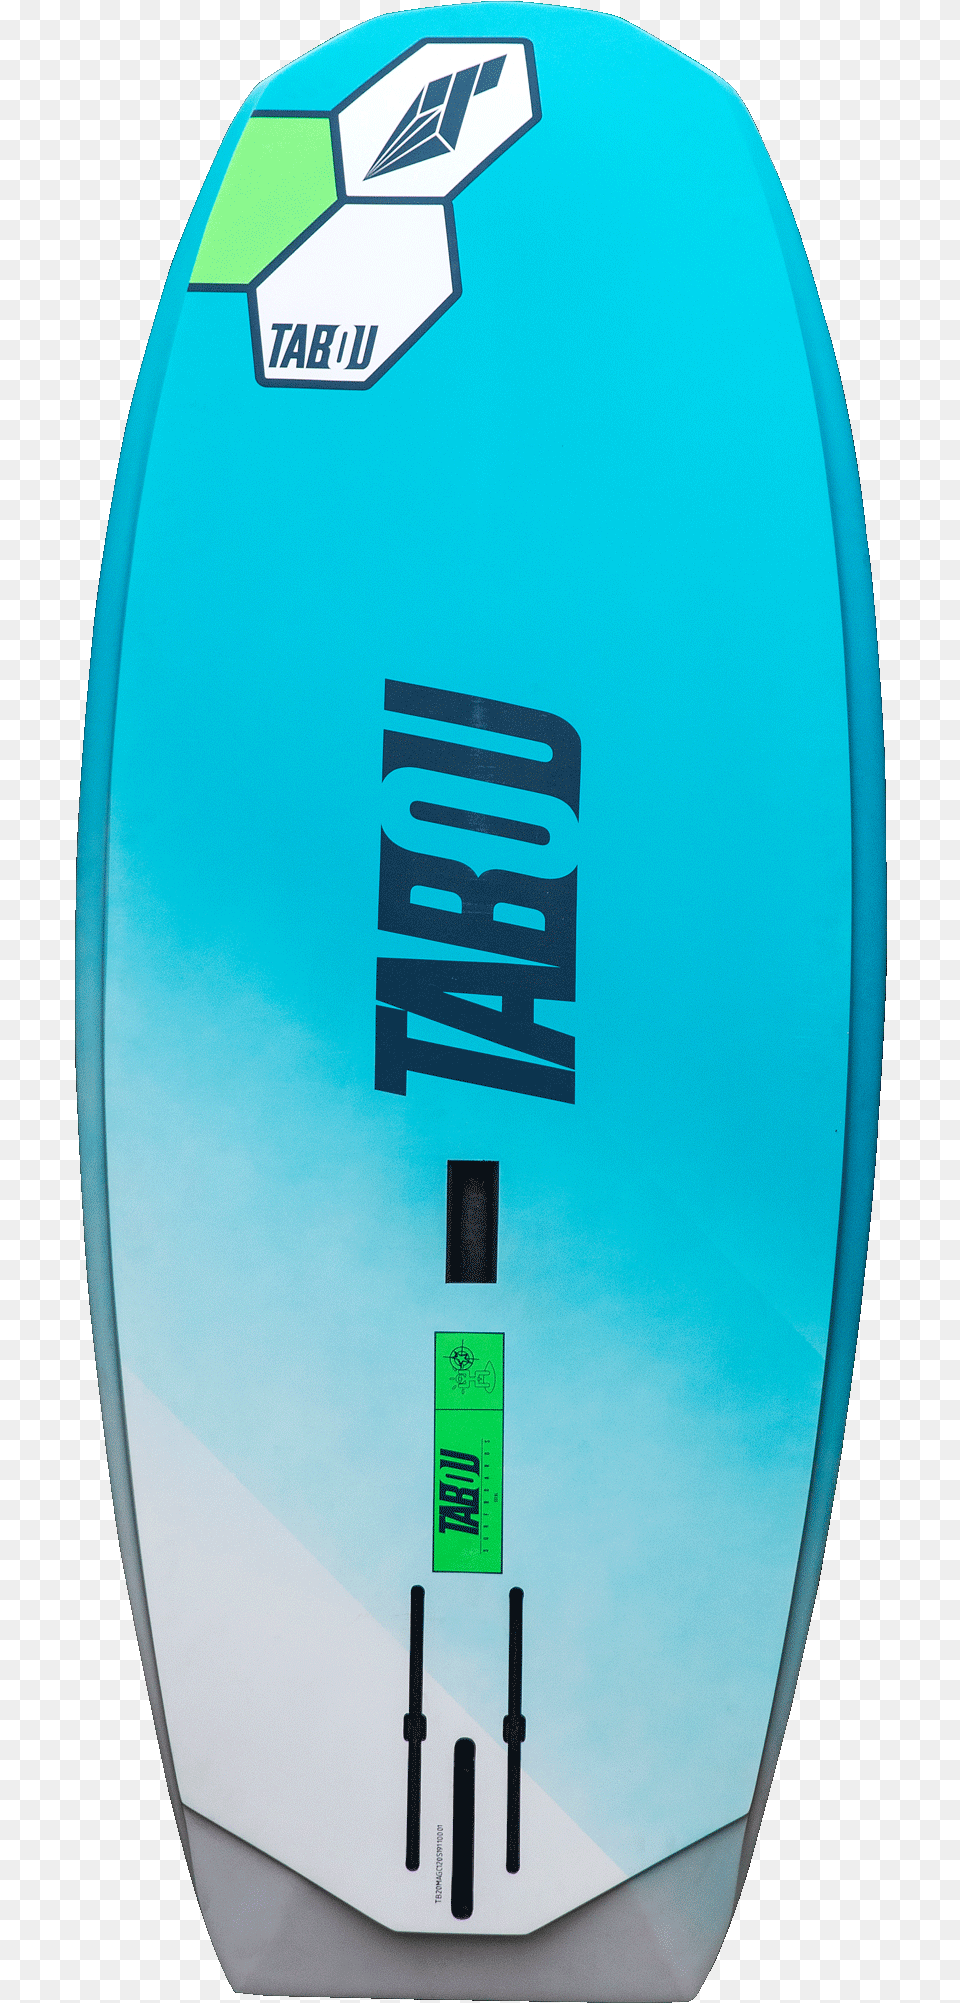 Tabou Foilboard Windsurfing Amp Foilwing Magic Carpet, Water, Surfing, Sport, Sea Waves Png